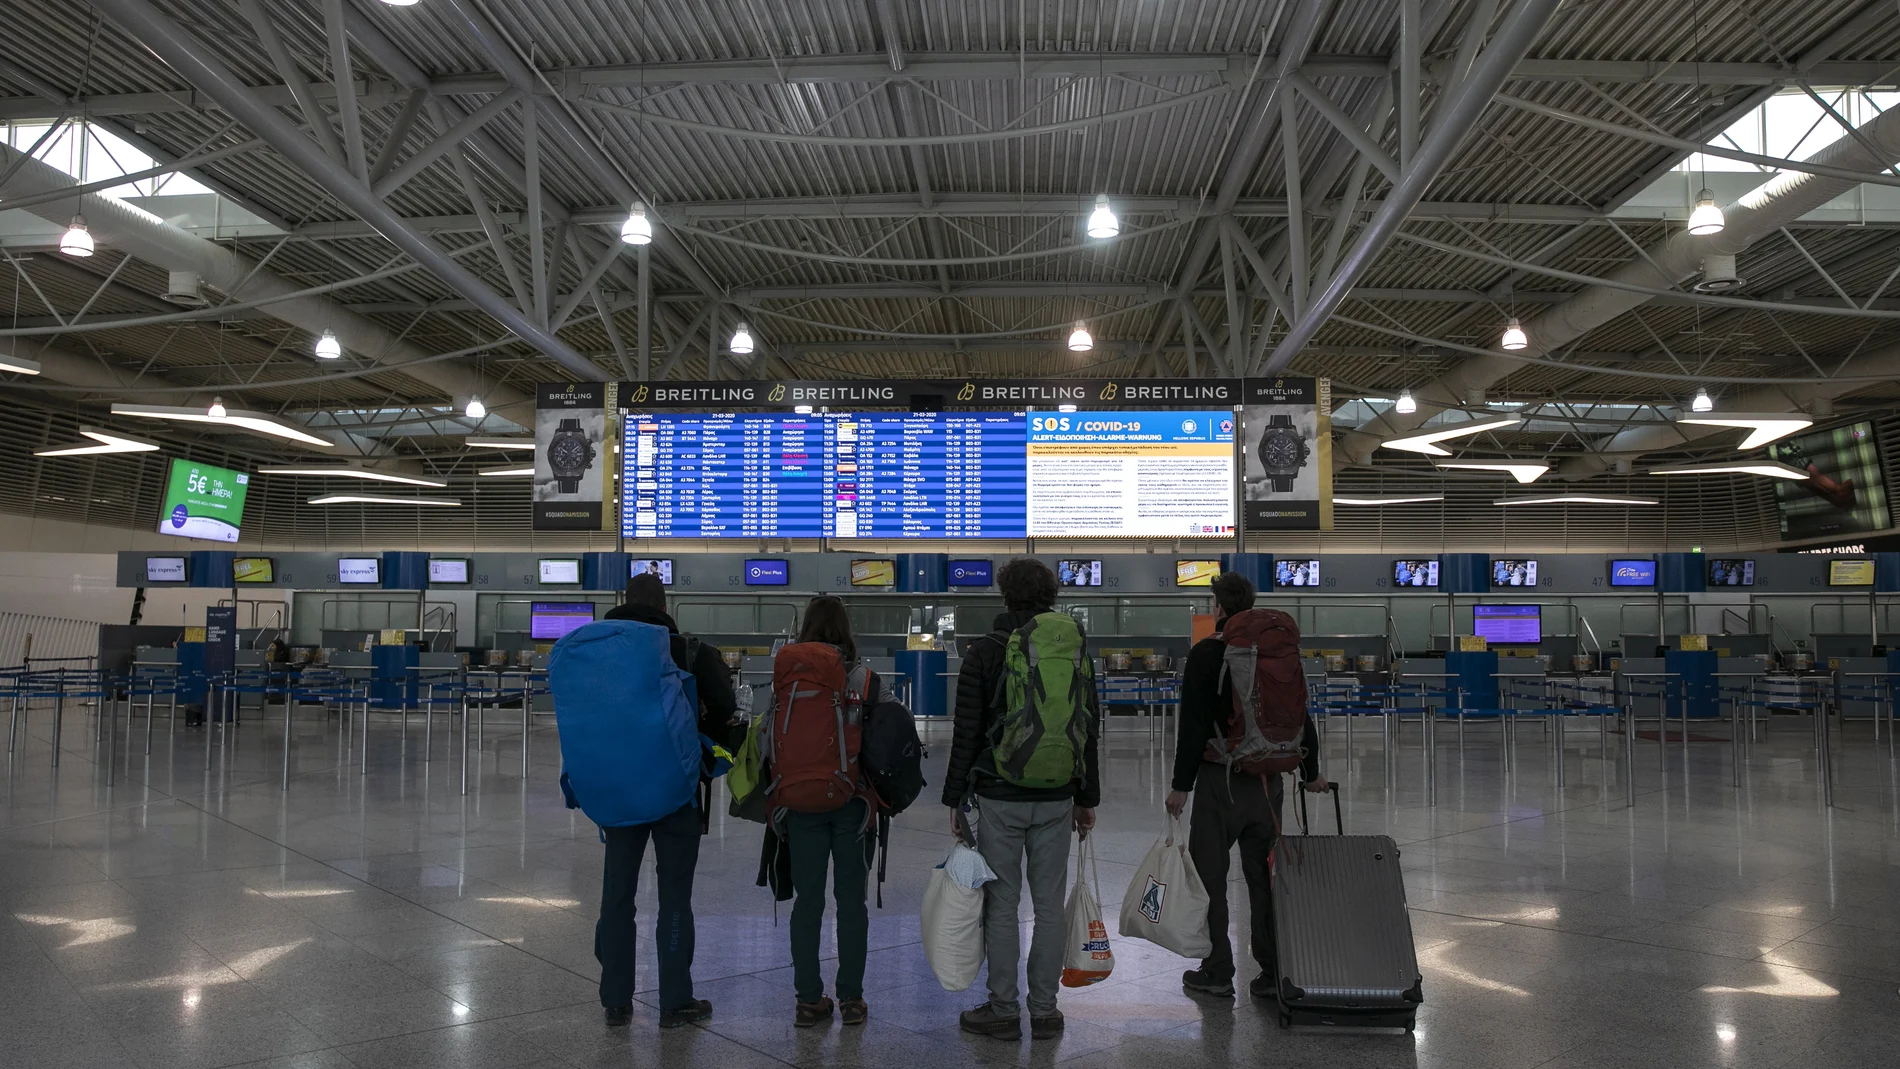 Passengers check a flight announcement board at Eleftherios Venizelos International Airport in Athens, Saturday, March 21, 2020. The government banned travel to Greece for all citizens from non-European Union countries and people entering the country would be asked to remain in self-quarantine for 14 days. For some people the COVID-19 coronavirus causes only mild or moderate symptoms, but for some it causes severe illness.(AP Photo/Yorgos Karahalis)